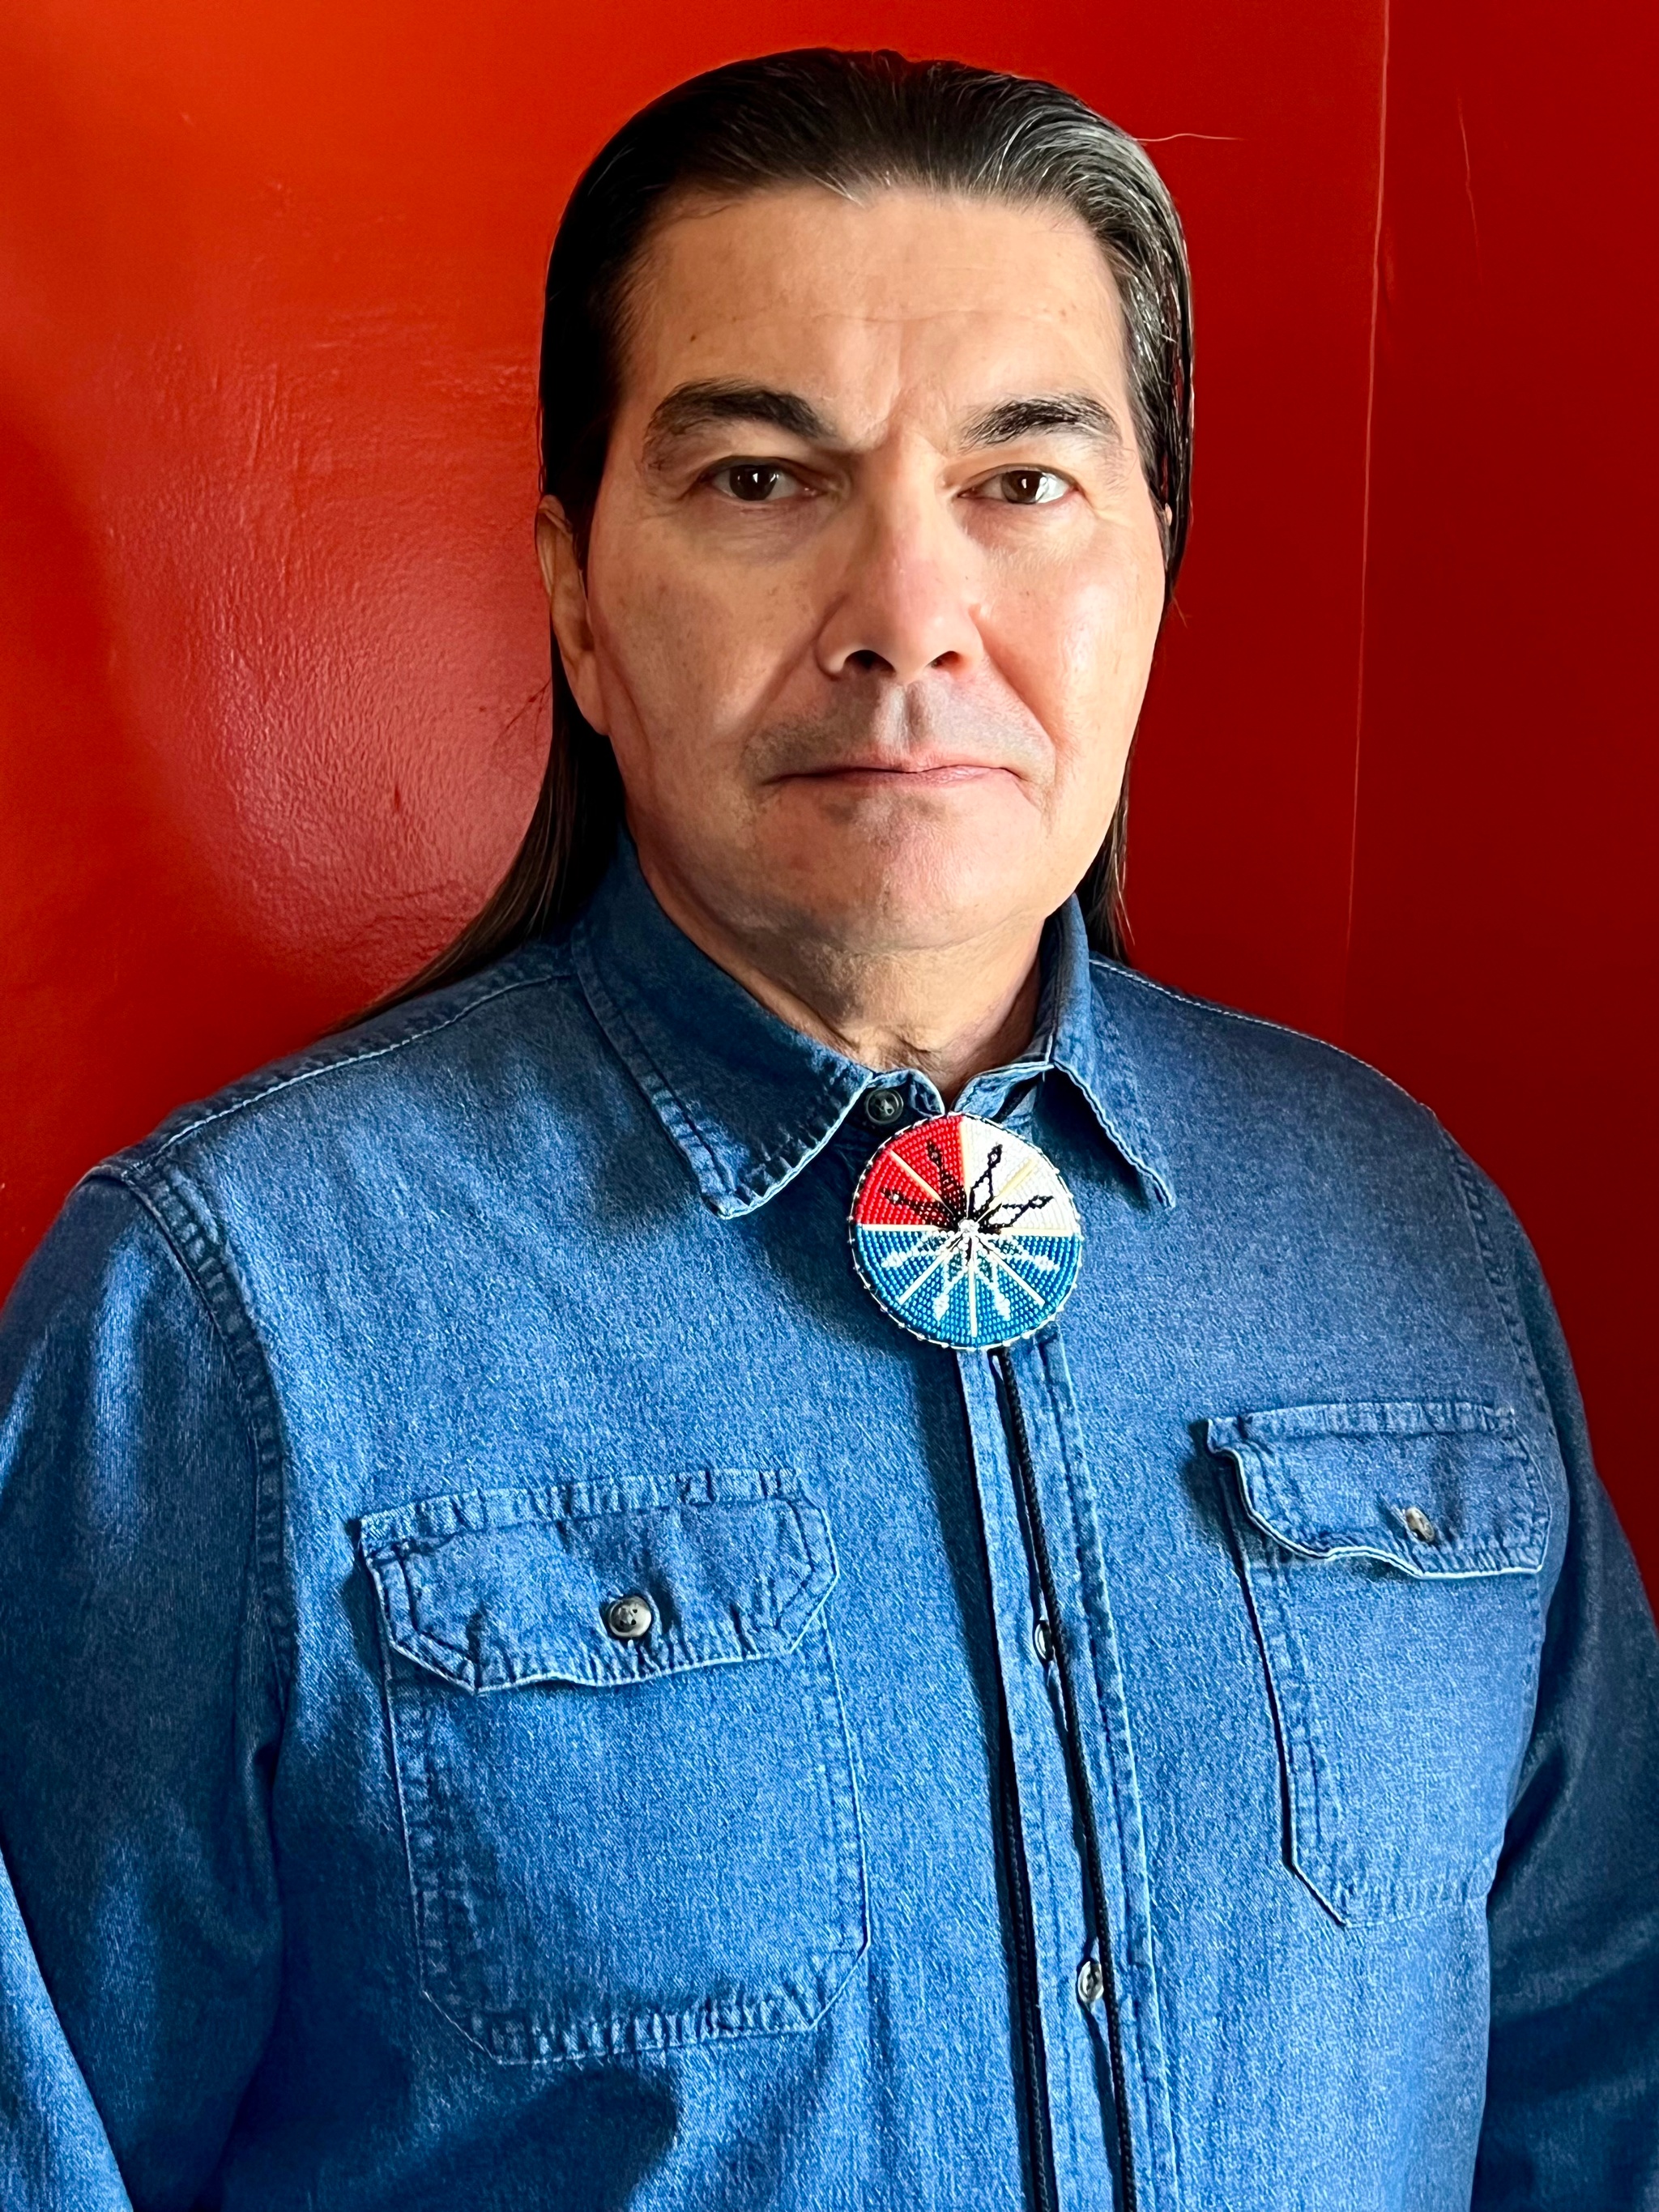 A portrait of Curtis Zunigha, an Indigenous man who poses against a bright red wall. He wears a blue denim collared shirt and has long dark hair that is slicked back behind his head and neck.  